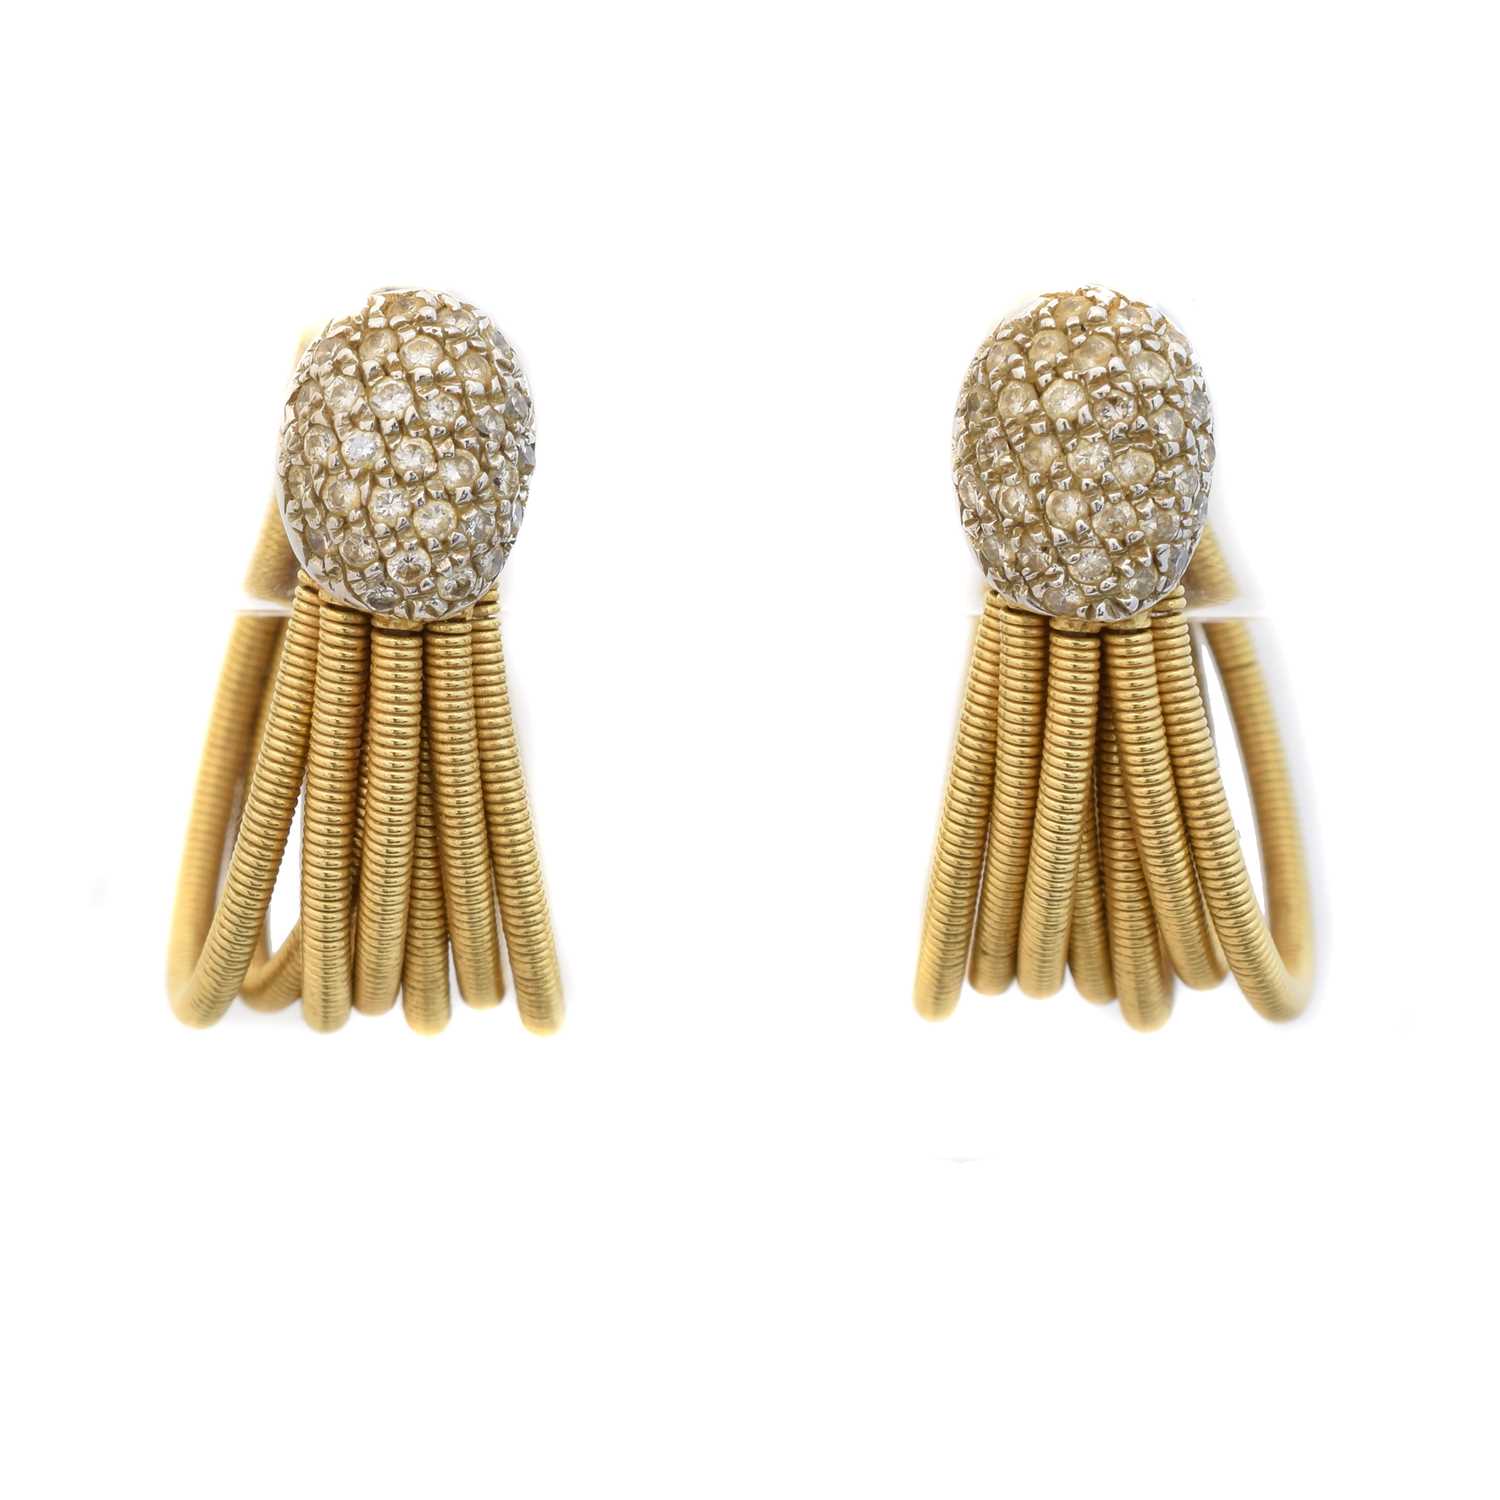 Lot 13 - A pair of 18ct gold diamond 'Marrakech' earrings by Marco Bicego